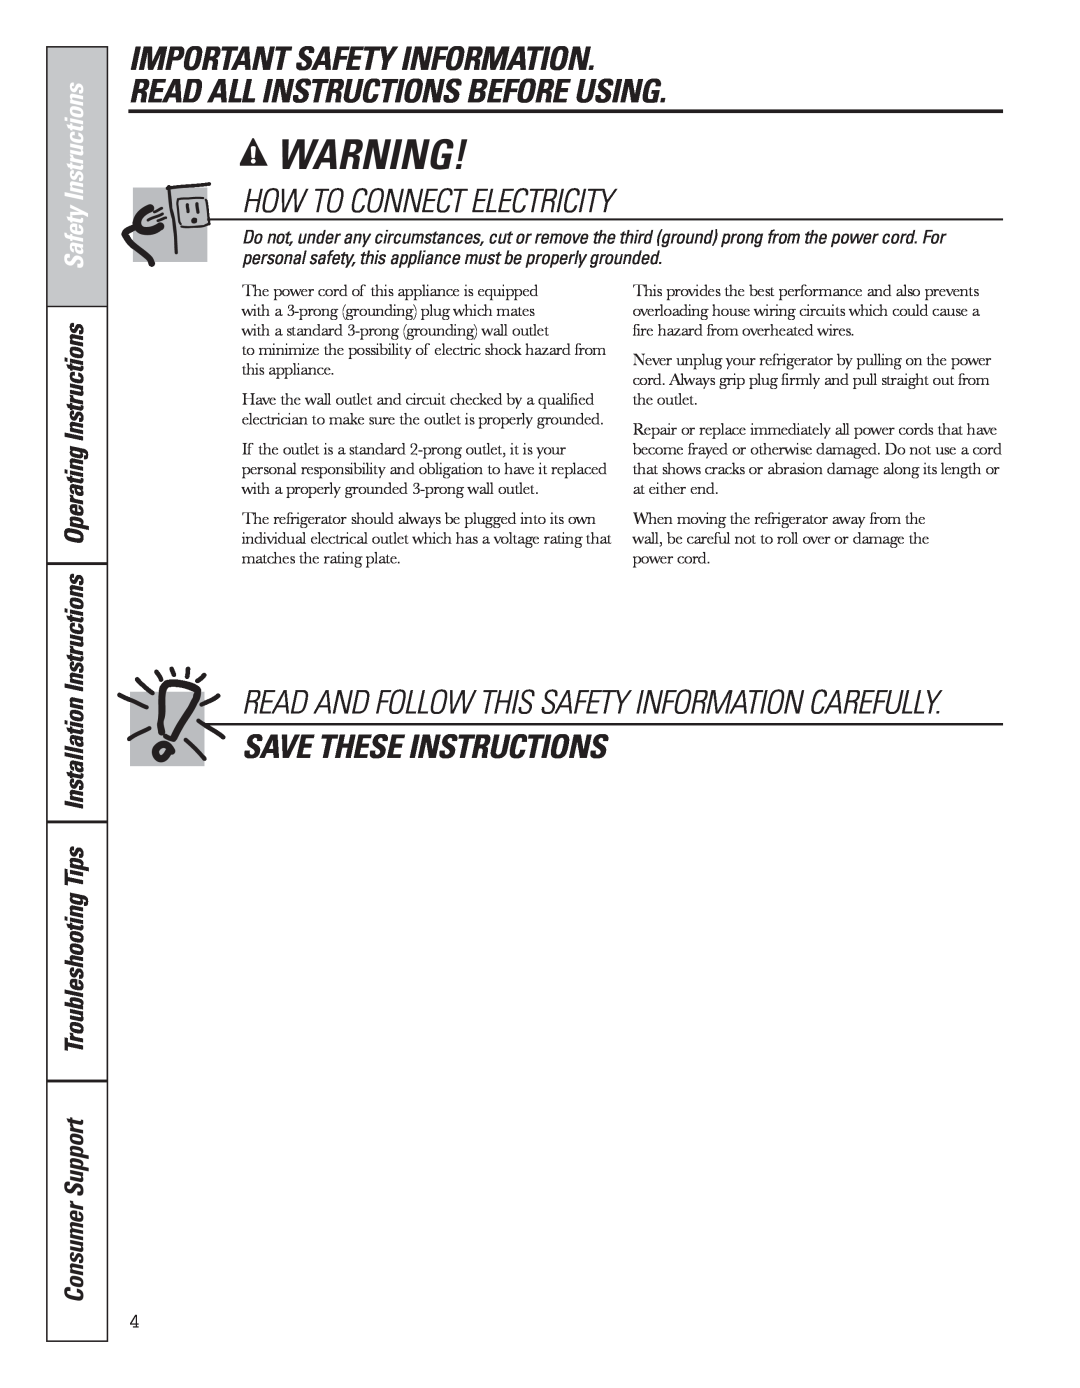 GE 49-60637 How To Connect Electricity, Save These Instructions, Instructions Operating Instructions, Safety Instructions 